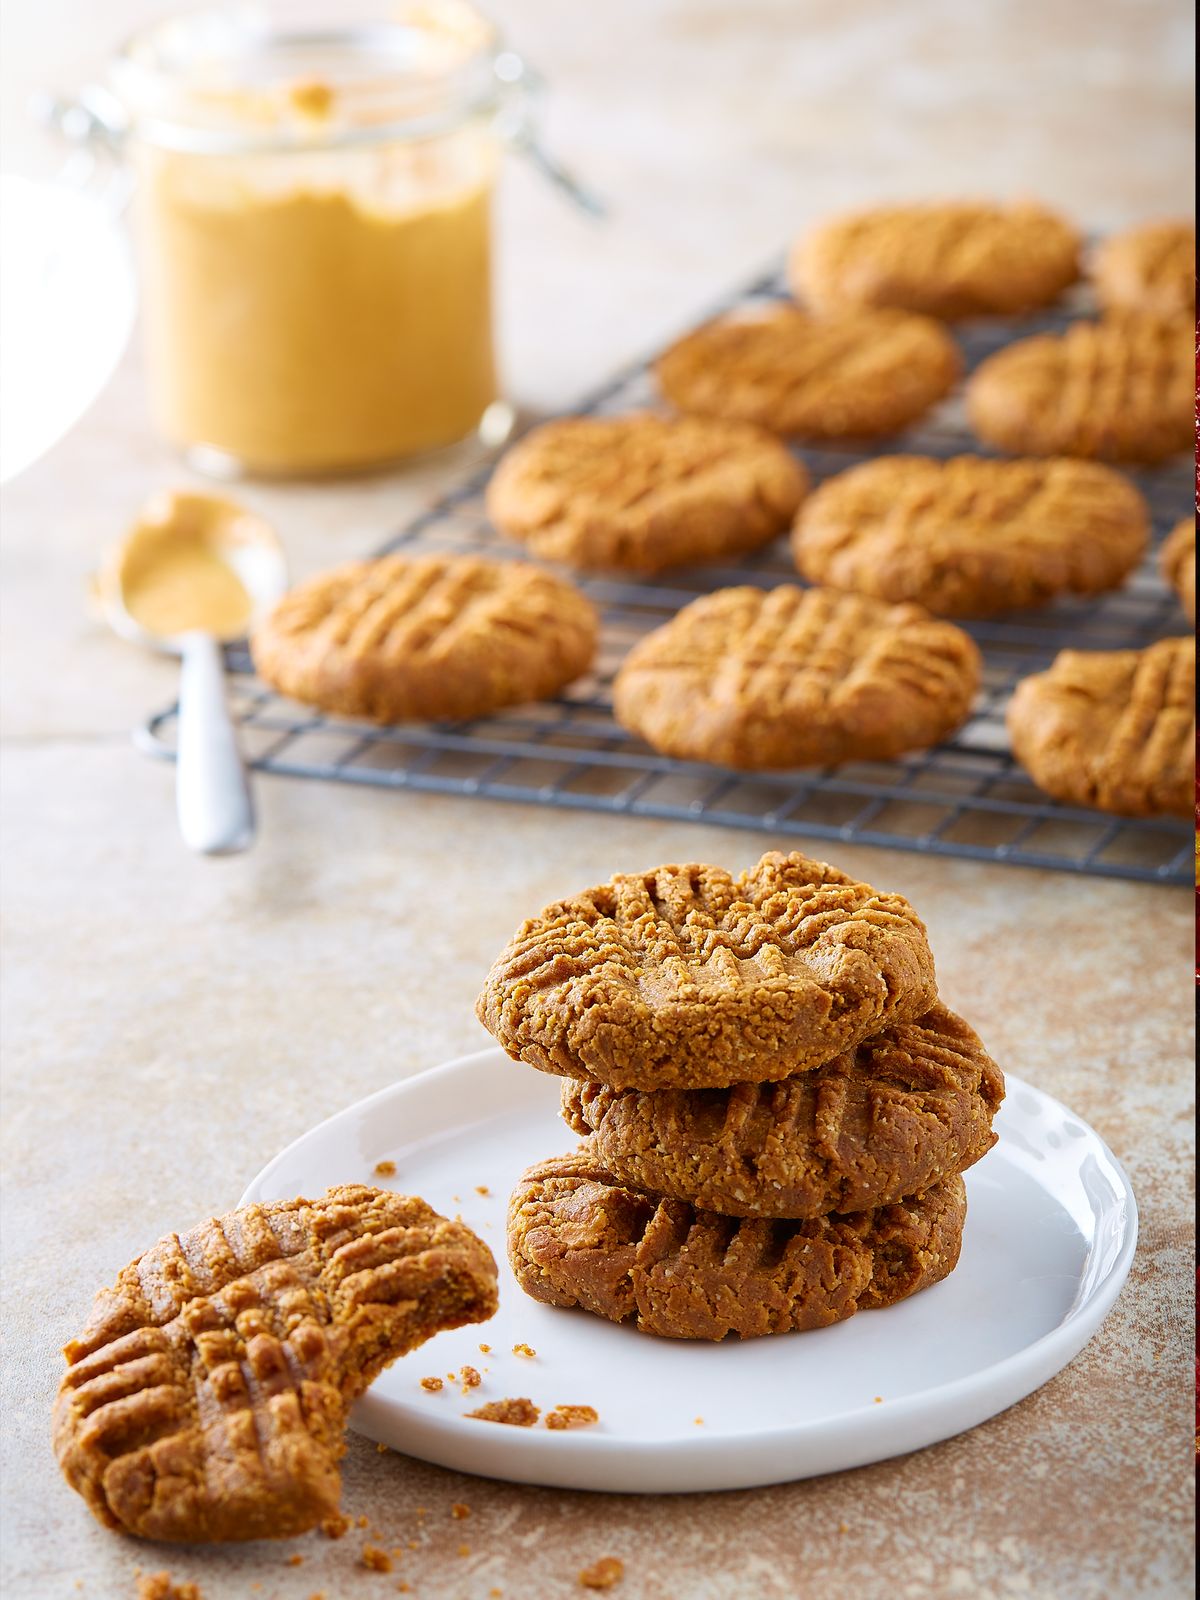 kevin-curry-peanut-butter-cookies.jpg